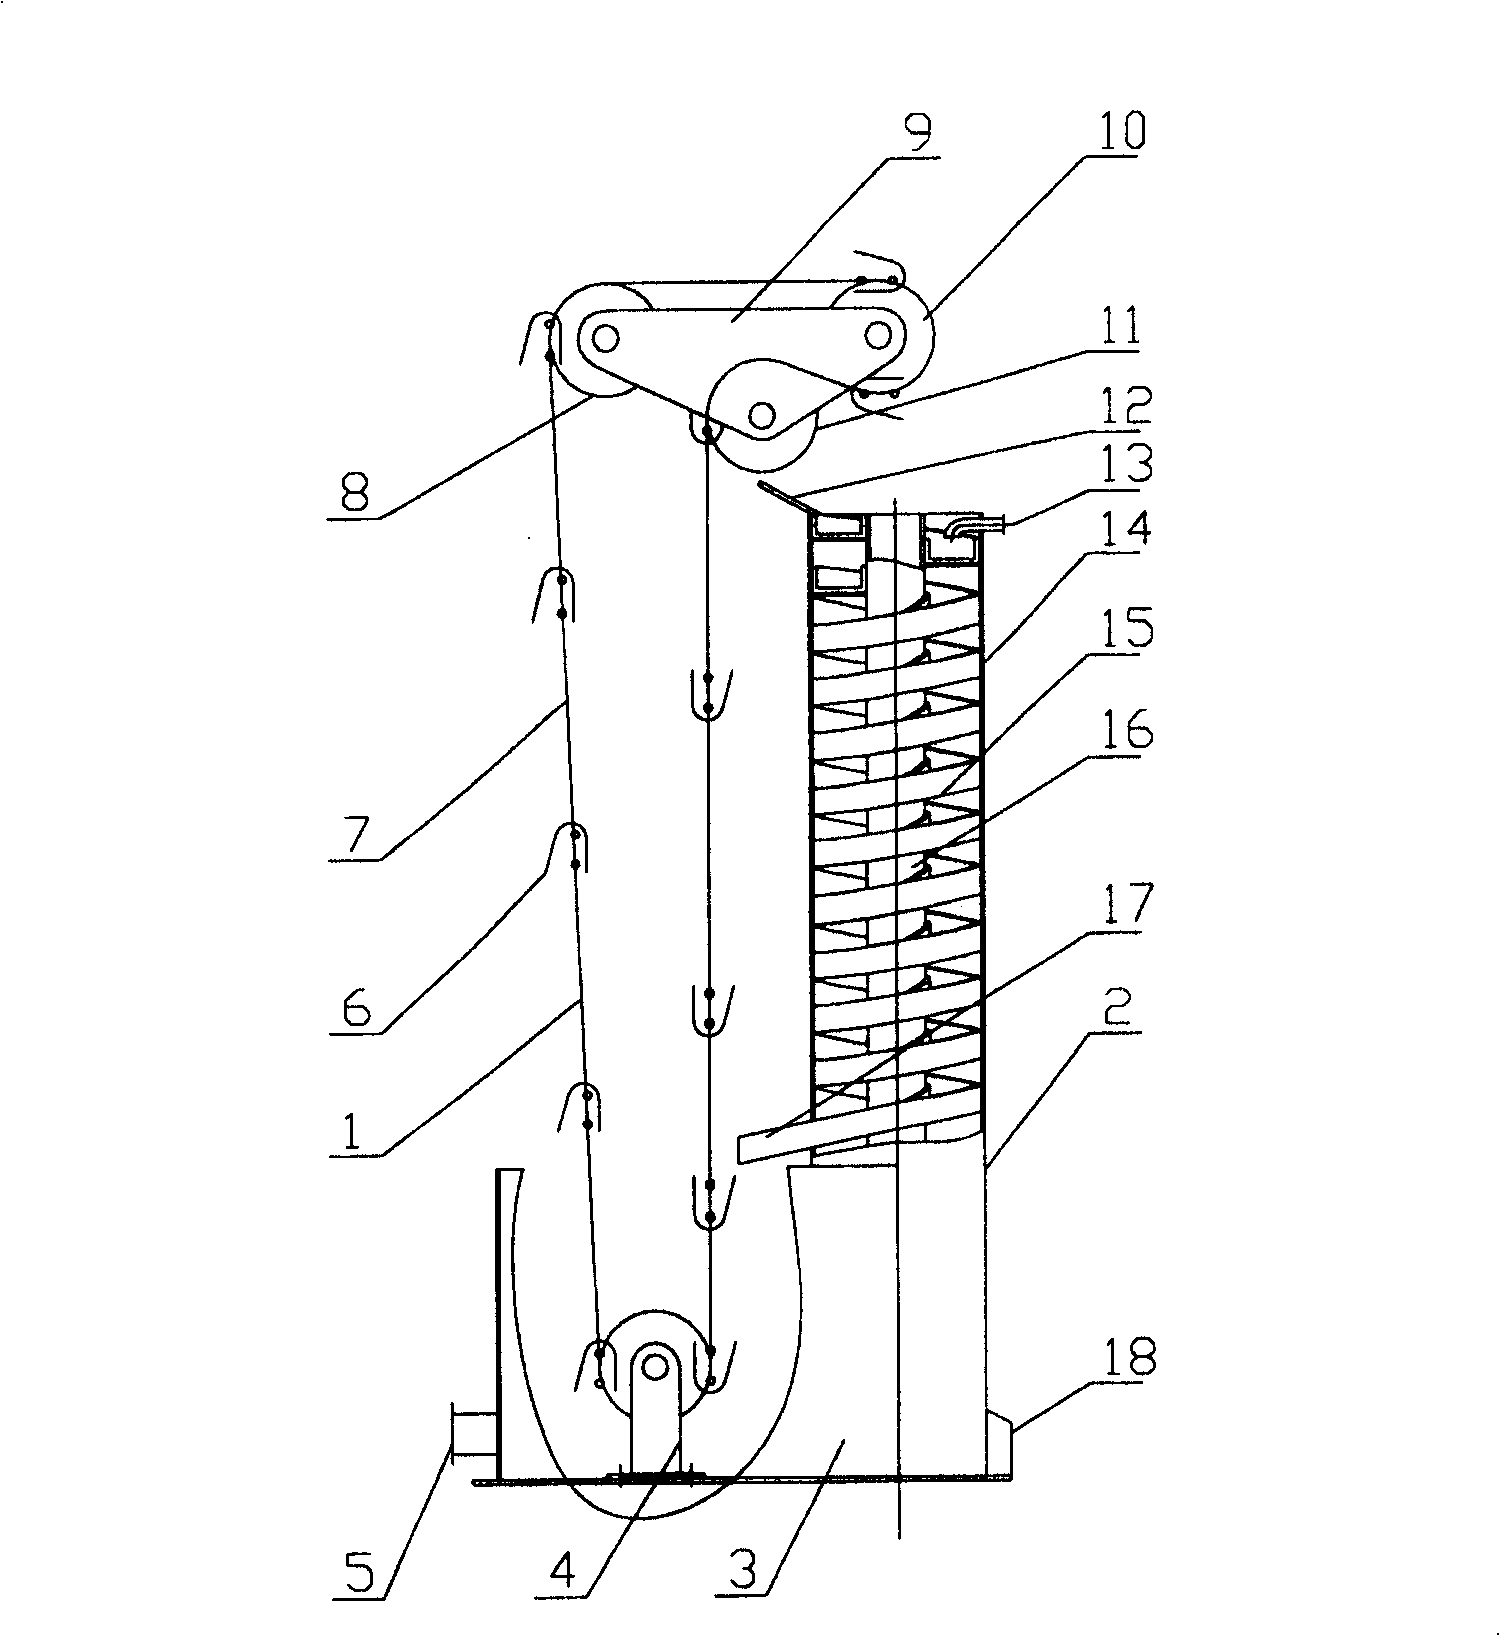 A moving-bed reactor